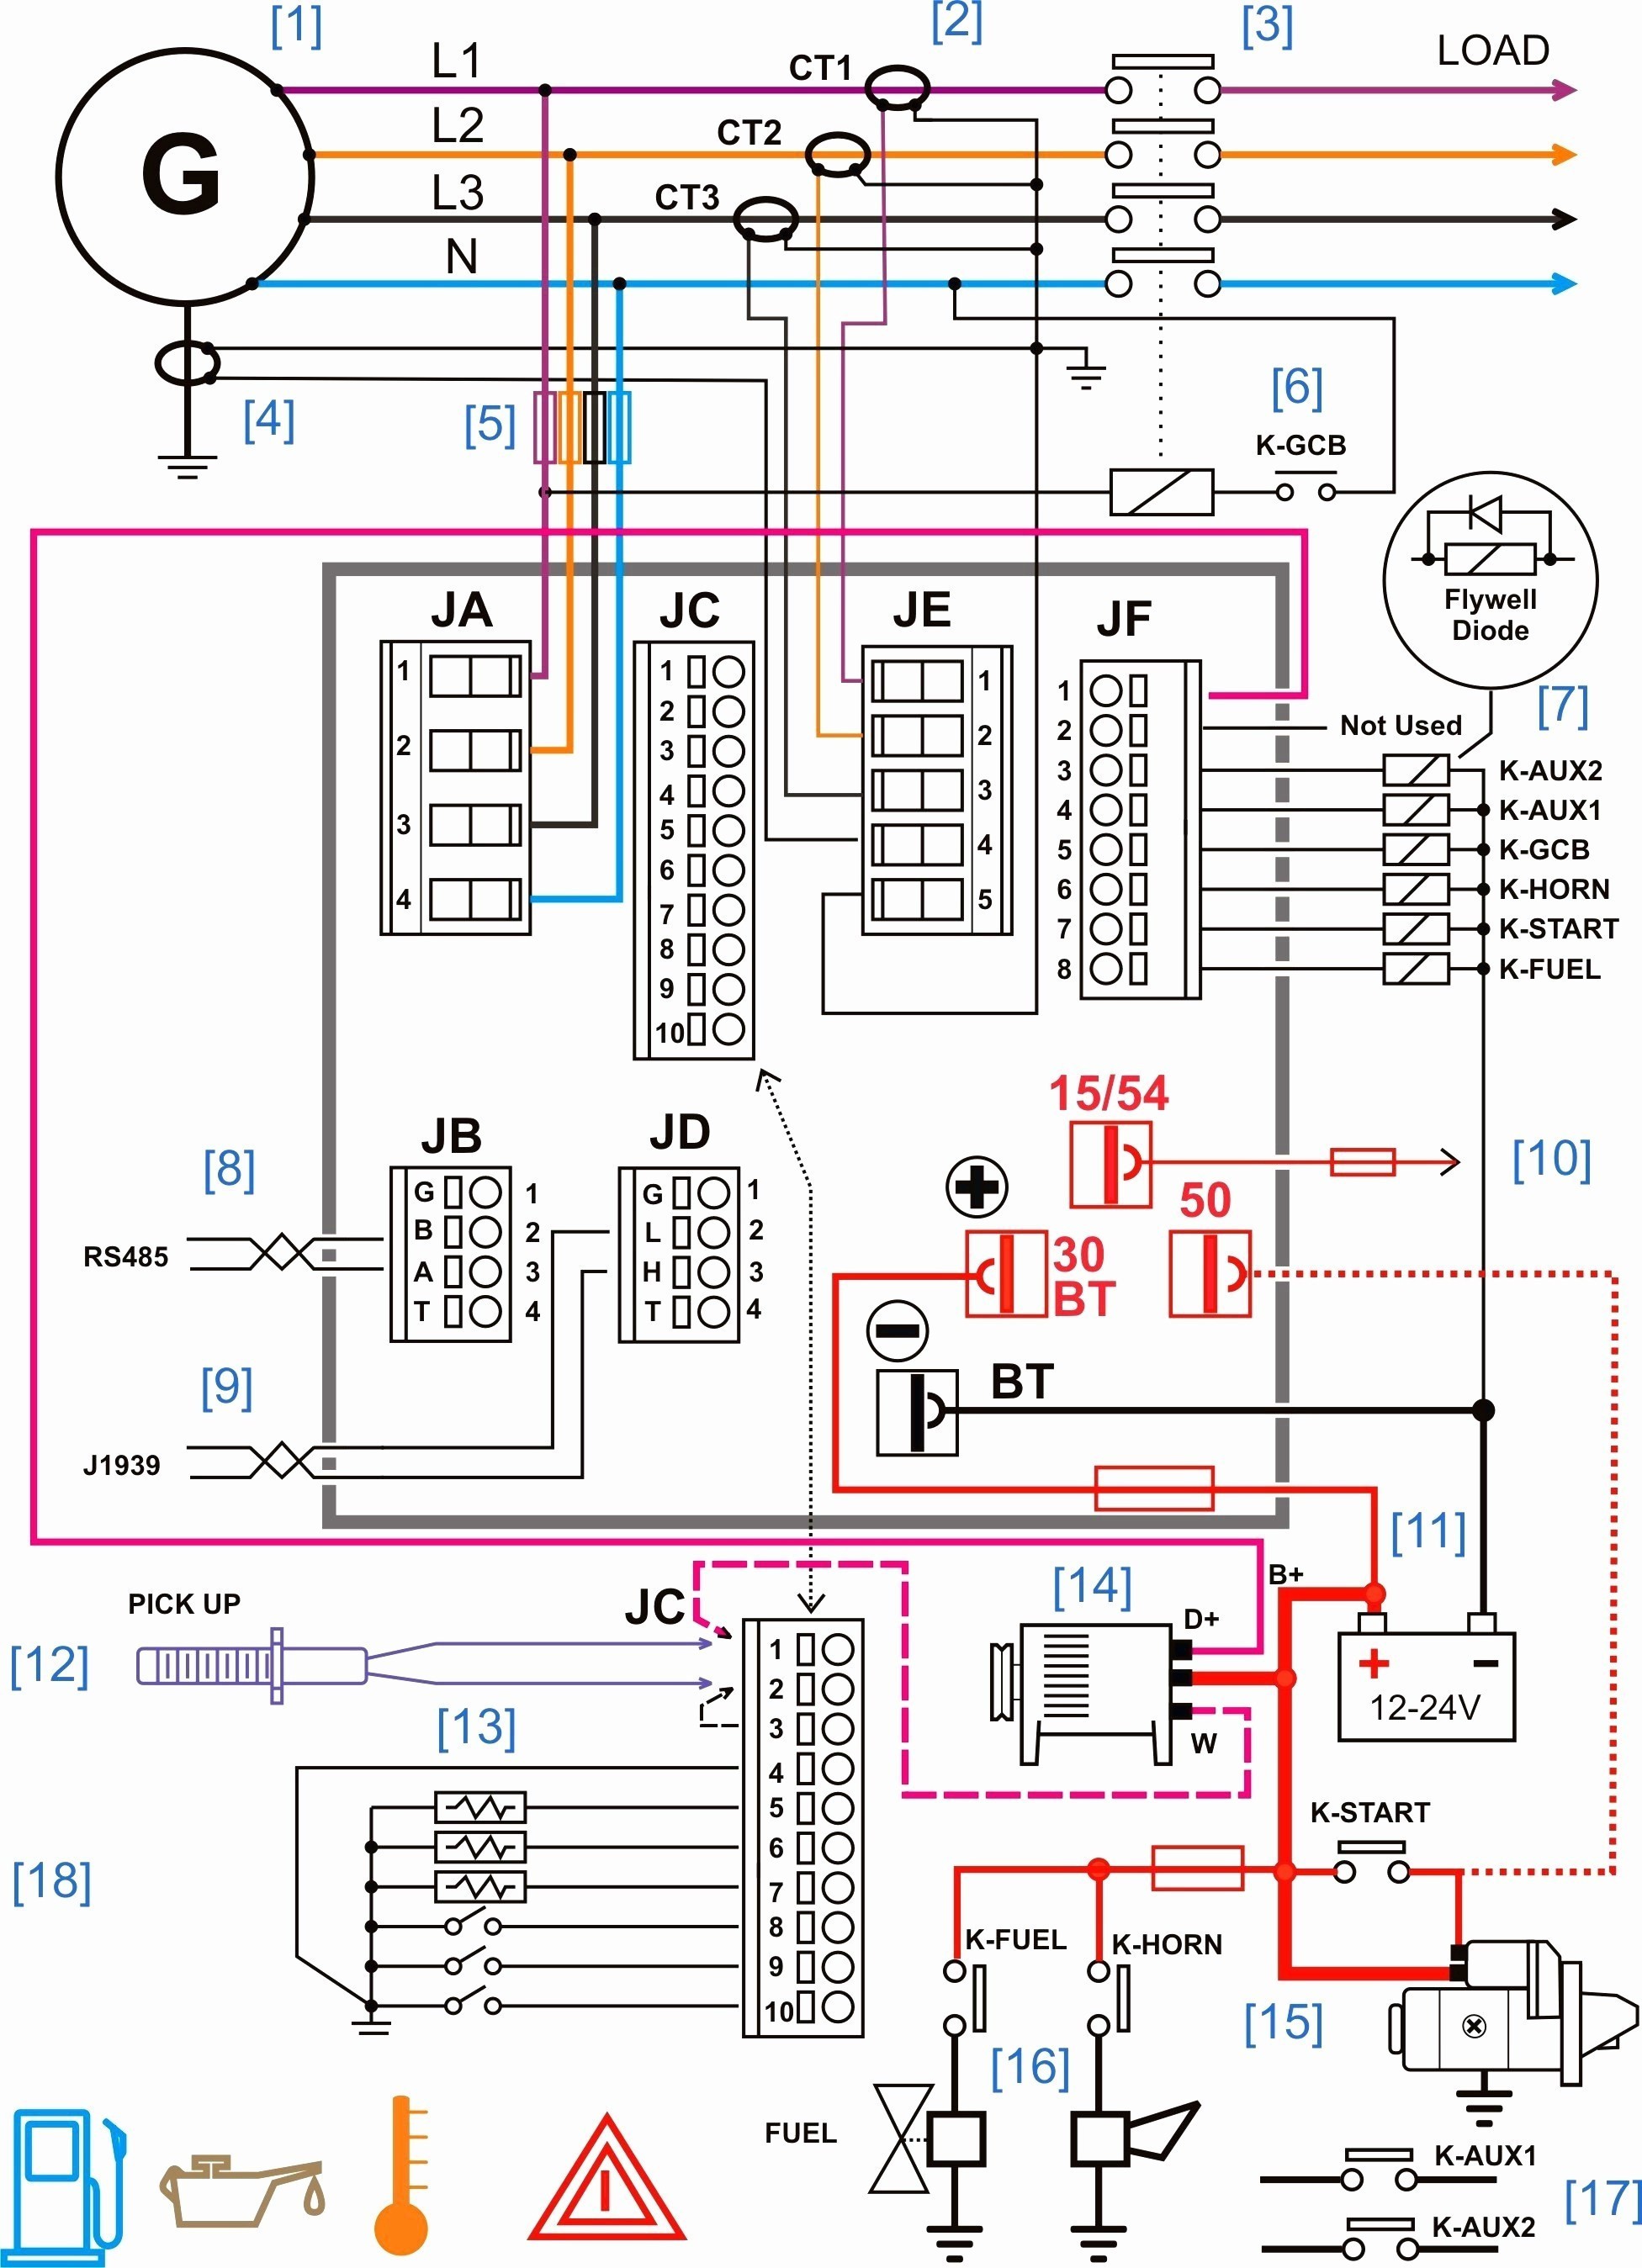 Wiring Harness Diagram 2018 Car Stereo Wiring Diagrams 0d